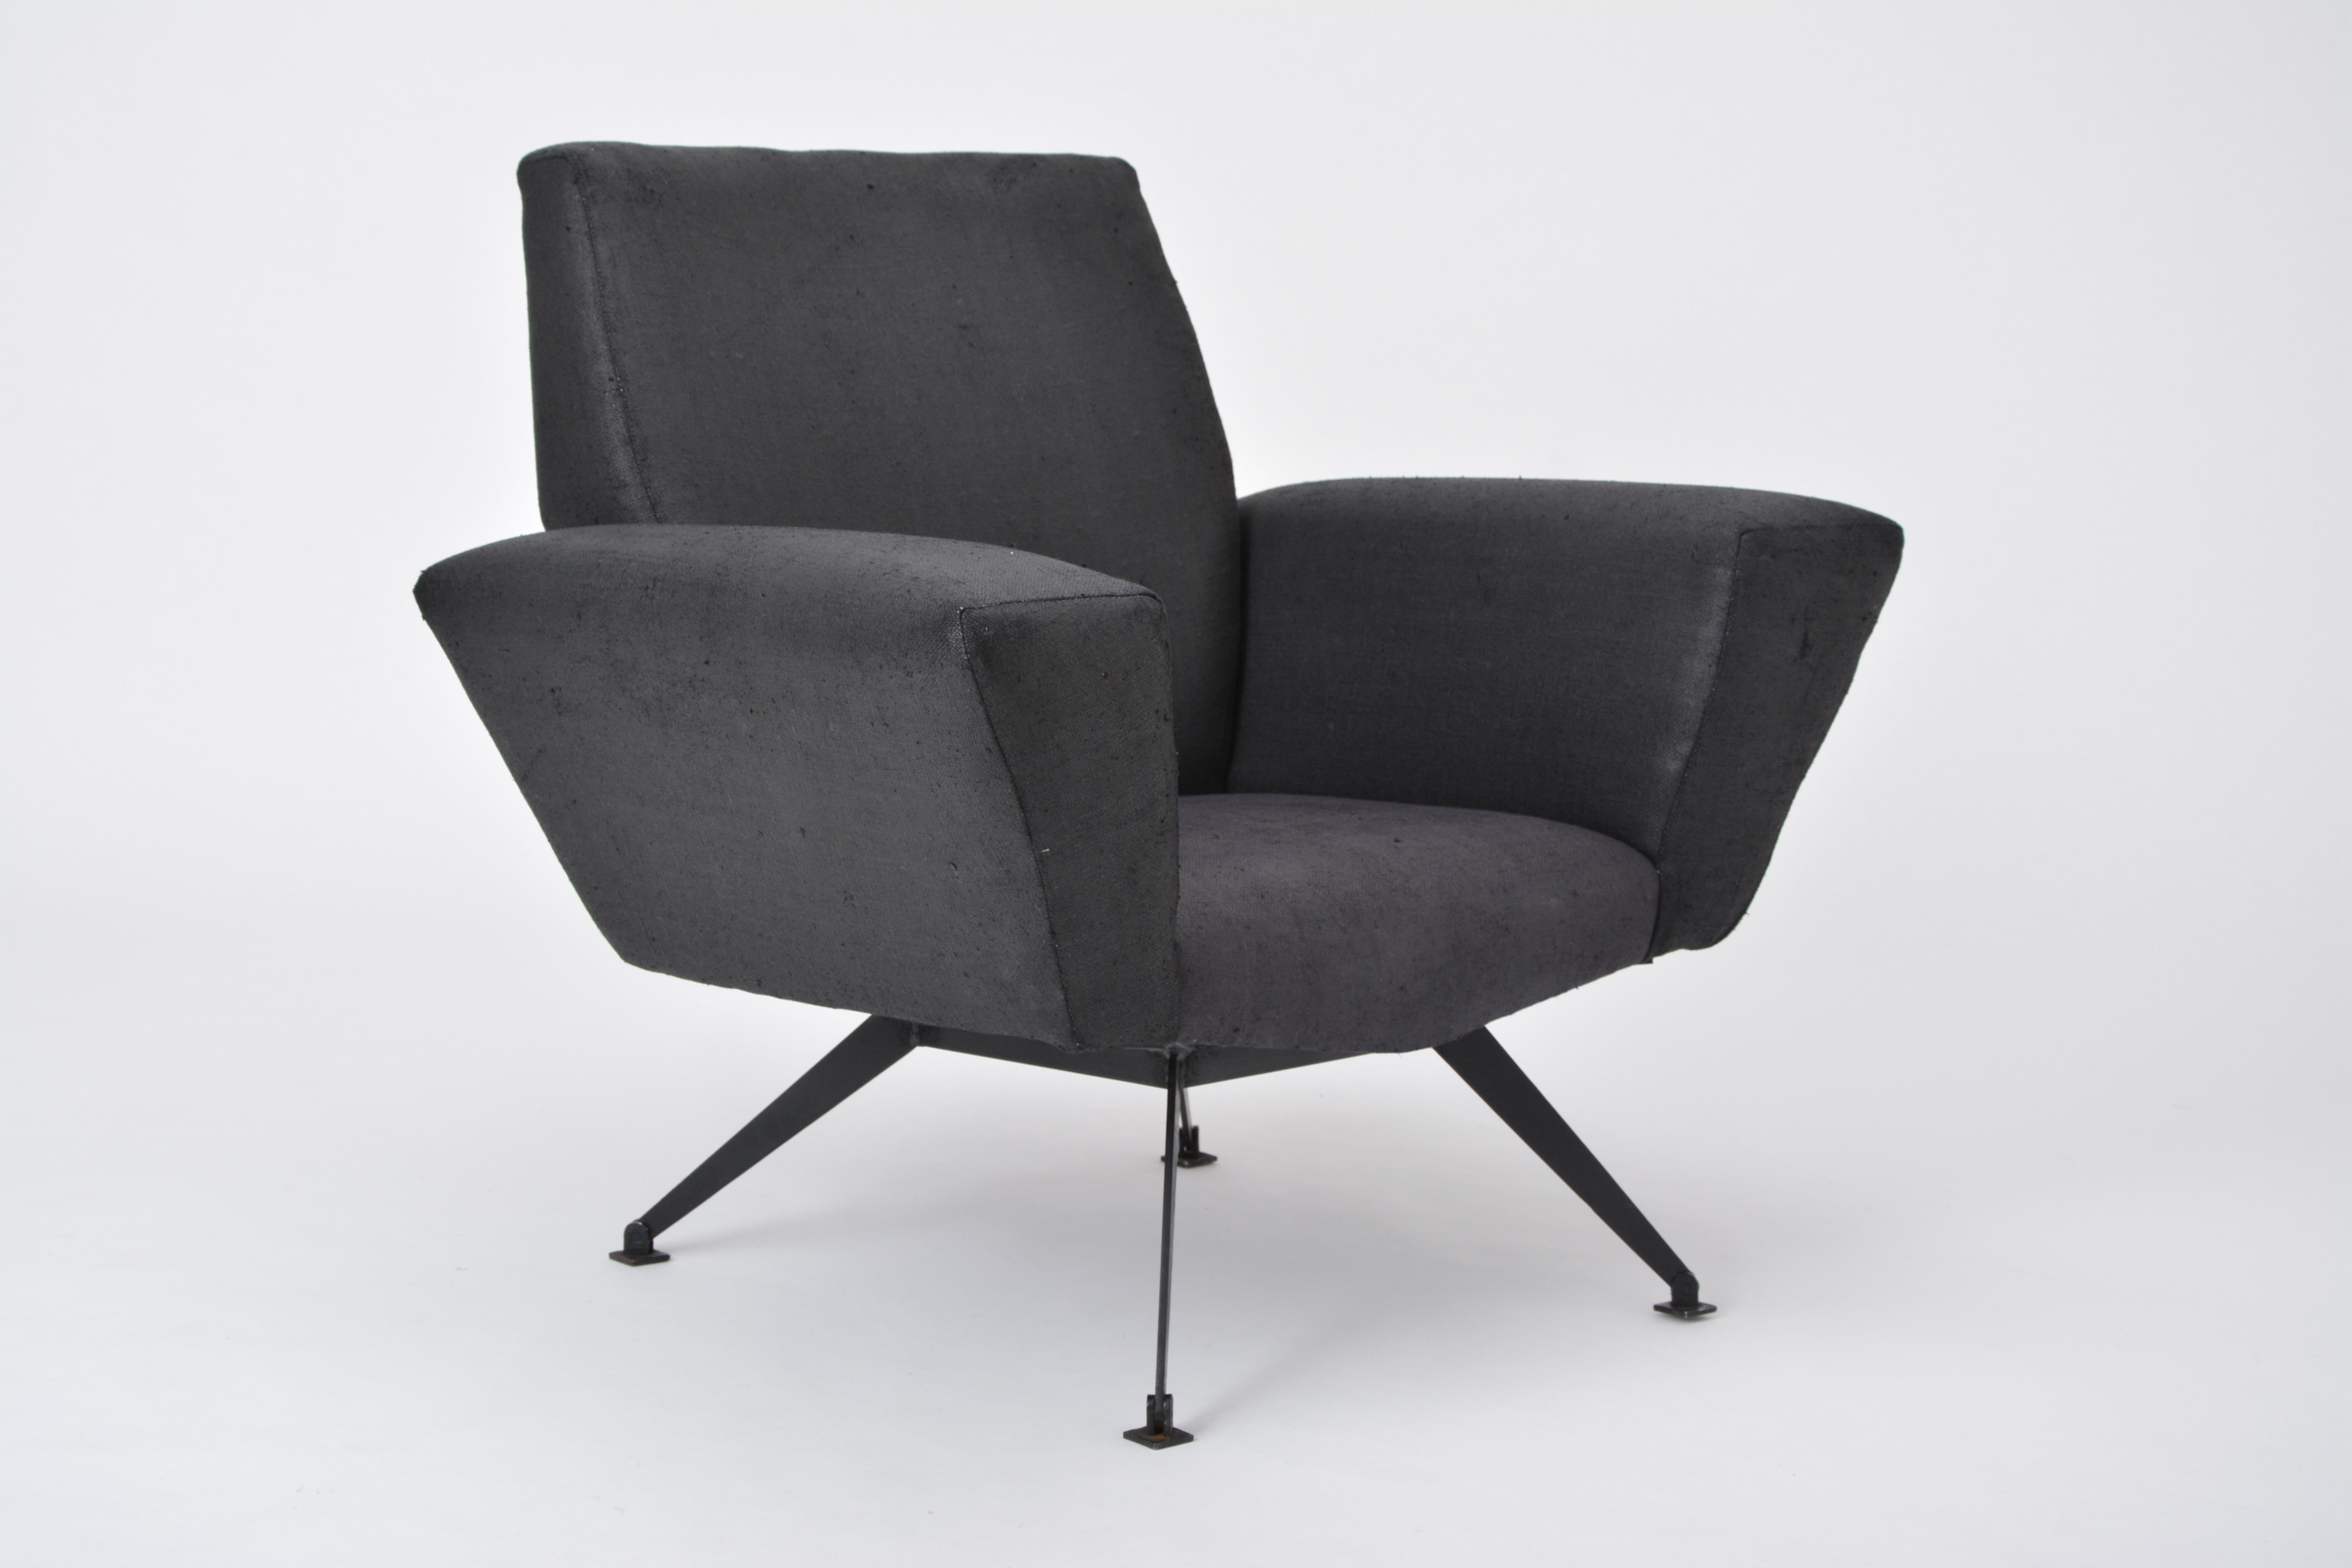 Lounge chair model 548 produced by Lenzi in Italy in the 1960s. The structure is made of lacquered metal. The upholstery is in good condition, the fabric is worn (see detail photos).